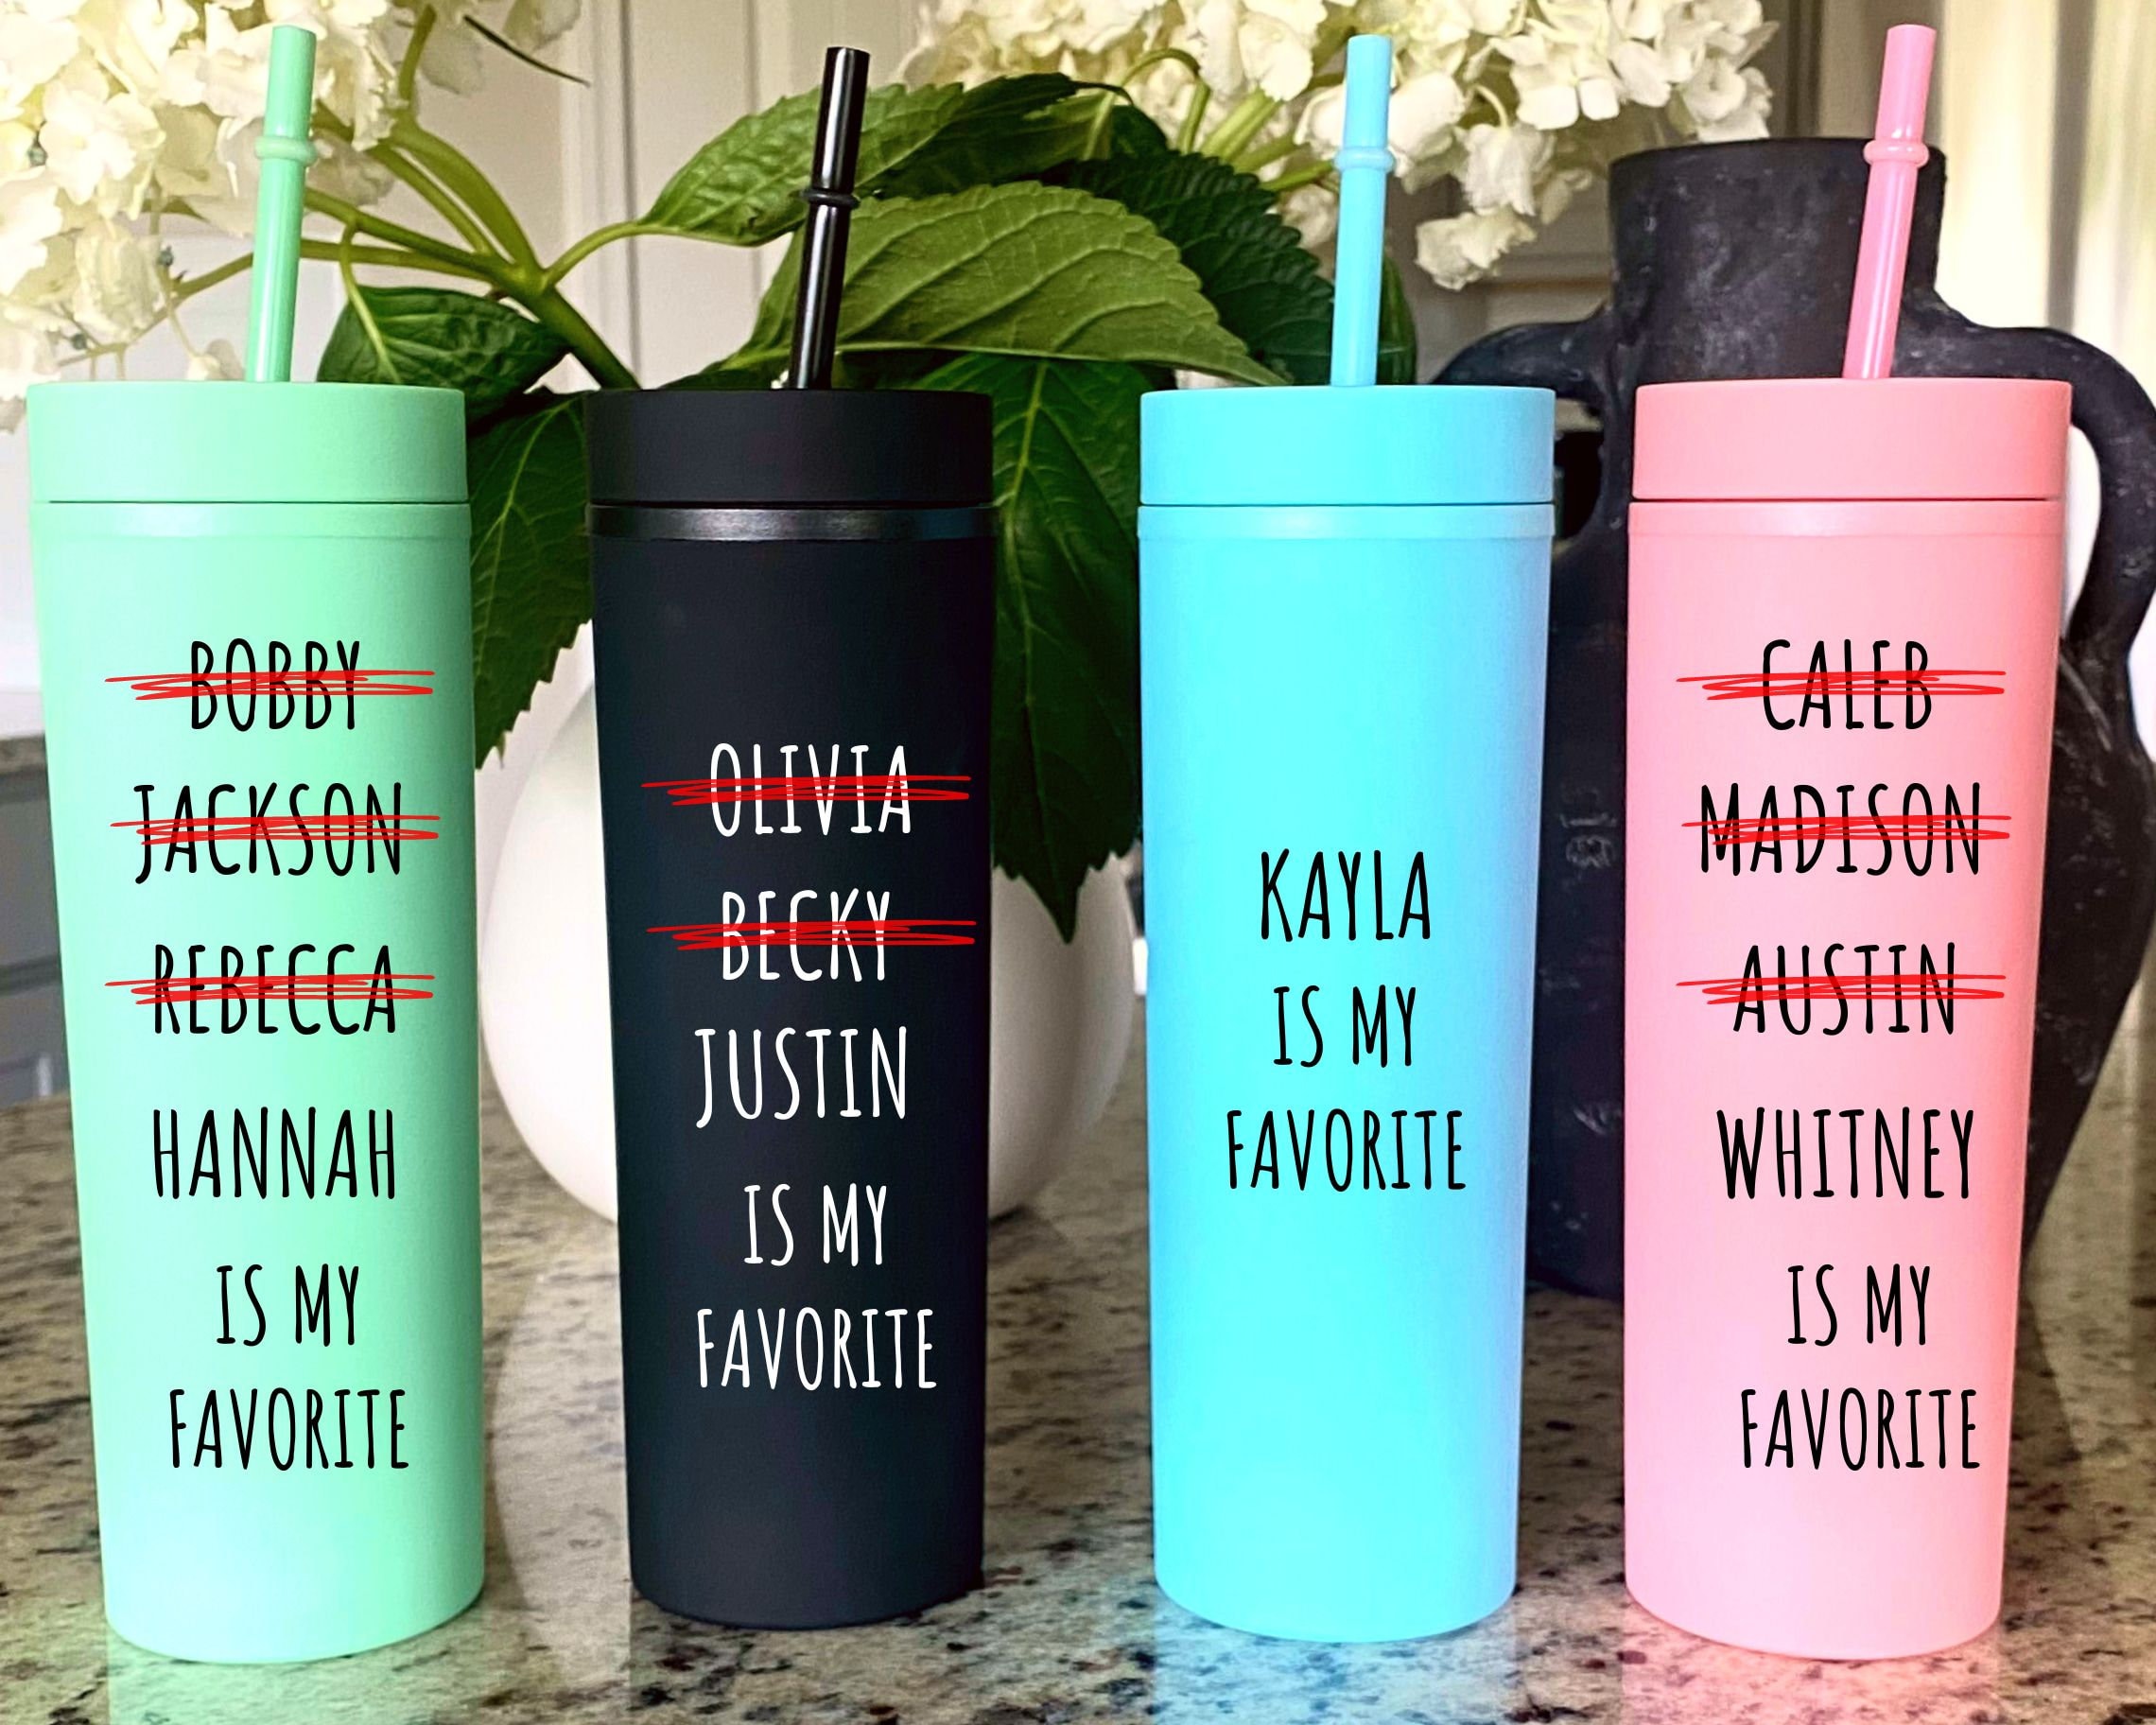 SANDJEST Mom Tumbler Gift for Mom from Son, Daughter - My Favorite Child  Gave Me This Cup 20oz Insul…See more SANDJEST Mom Tumbler Gift for Mom from